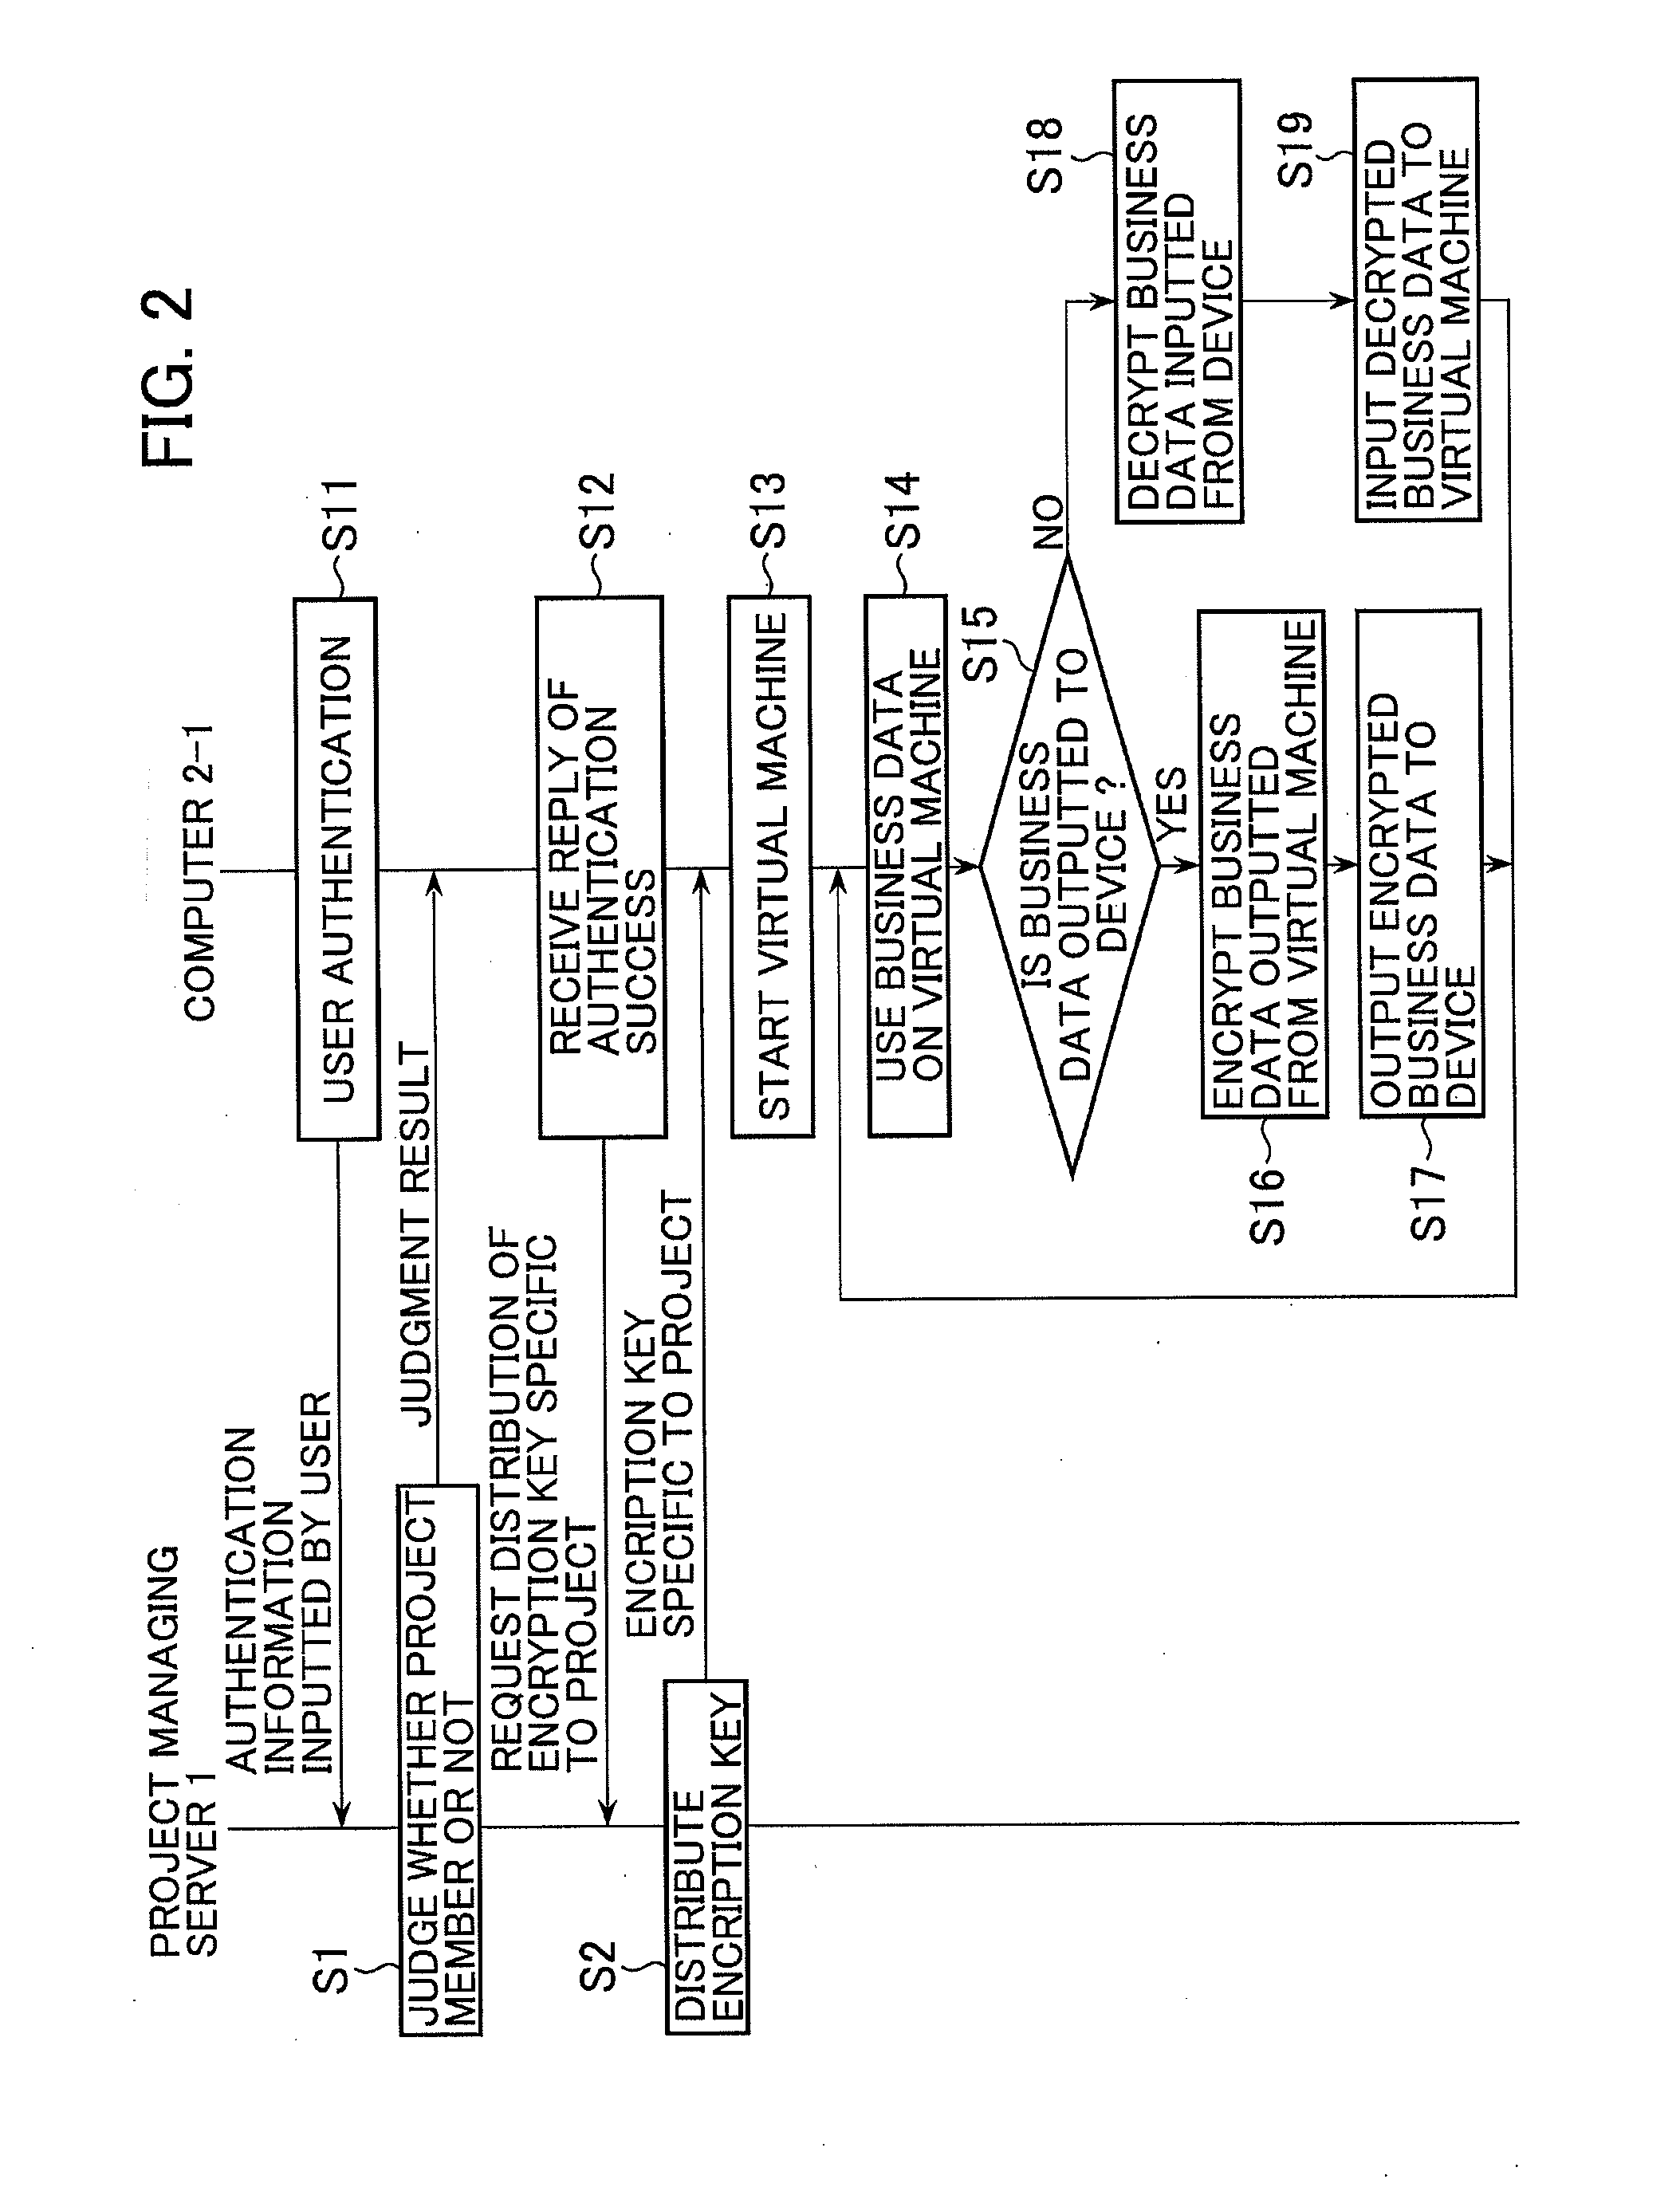 Information sharing system, computer, project managing server, and information sharing method used in them